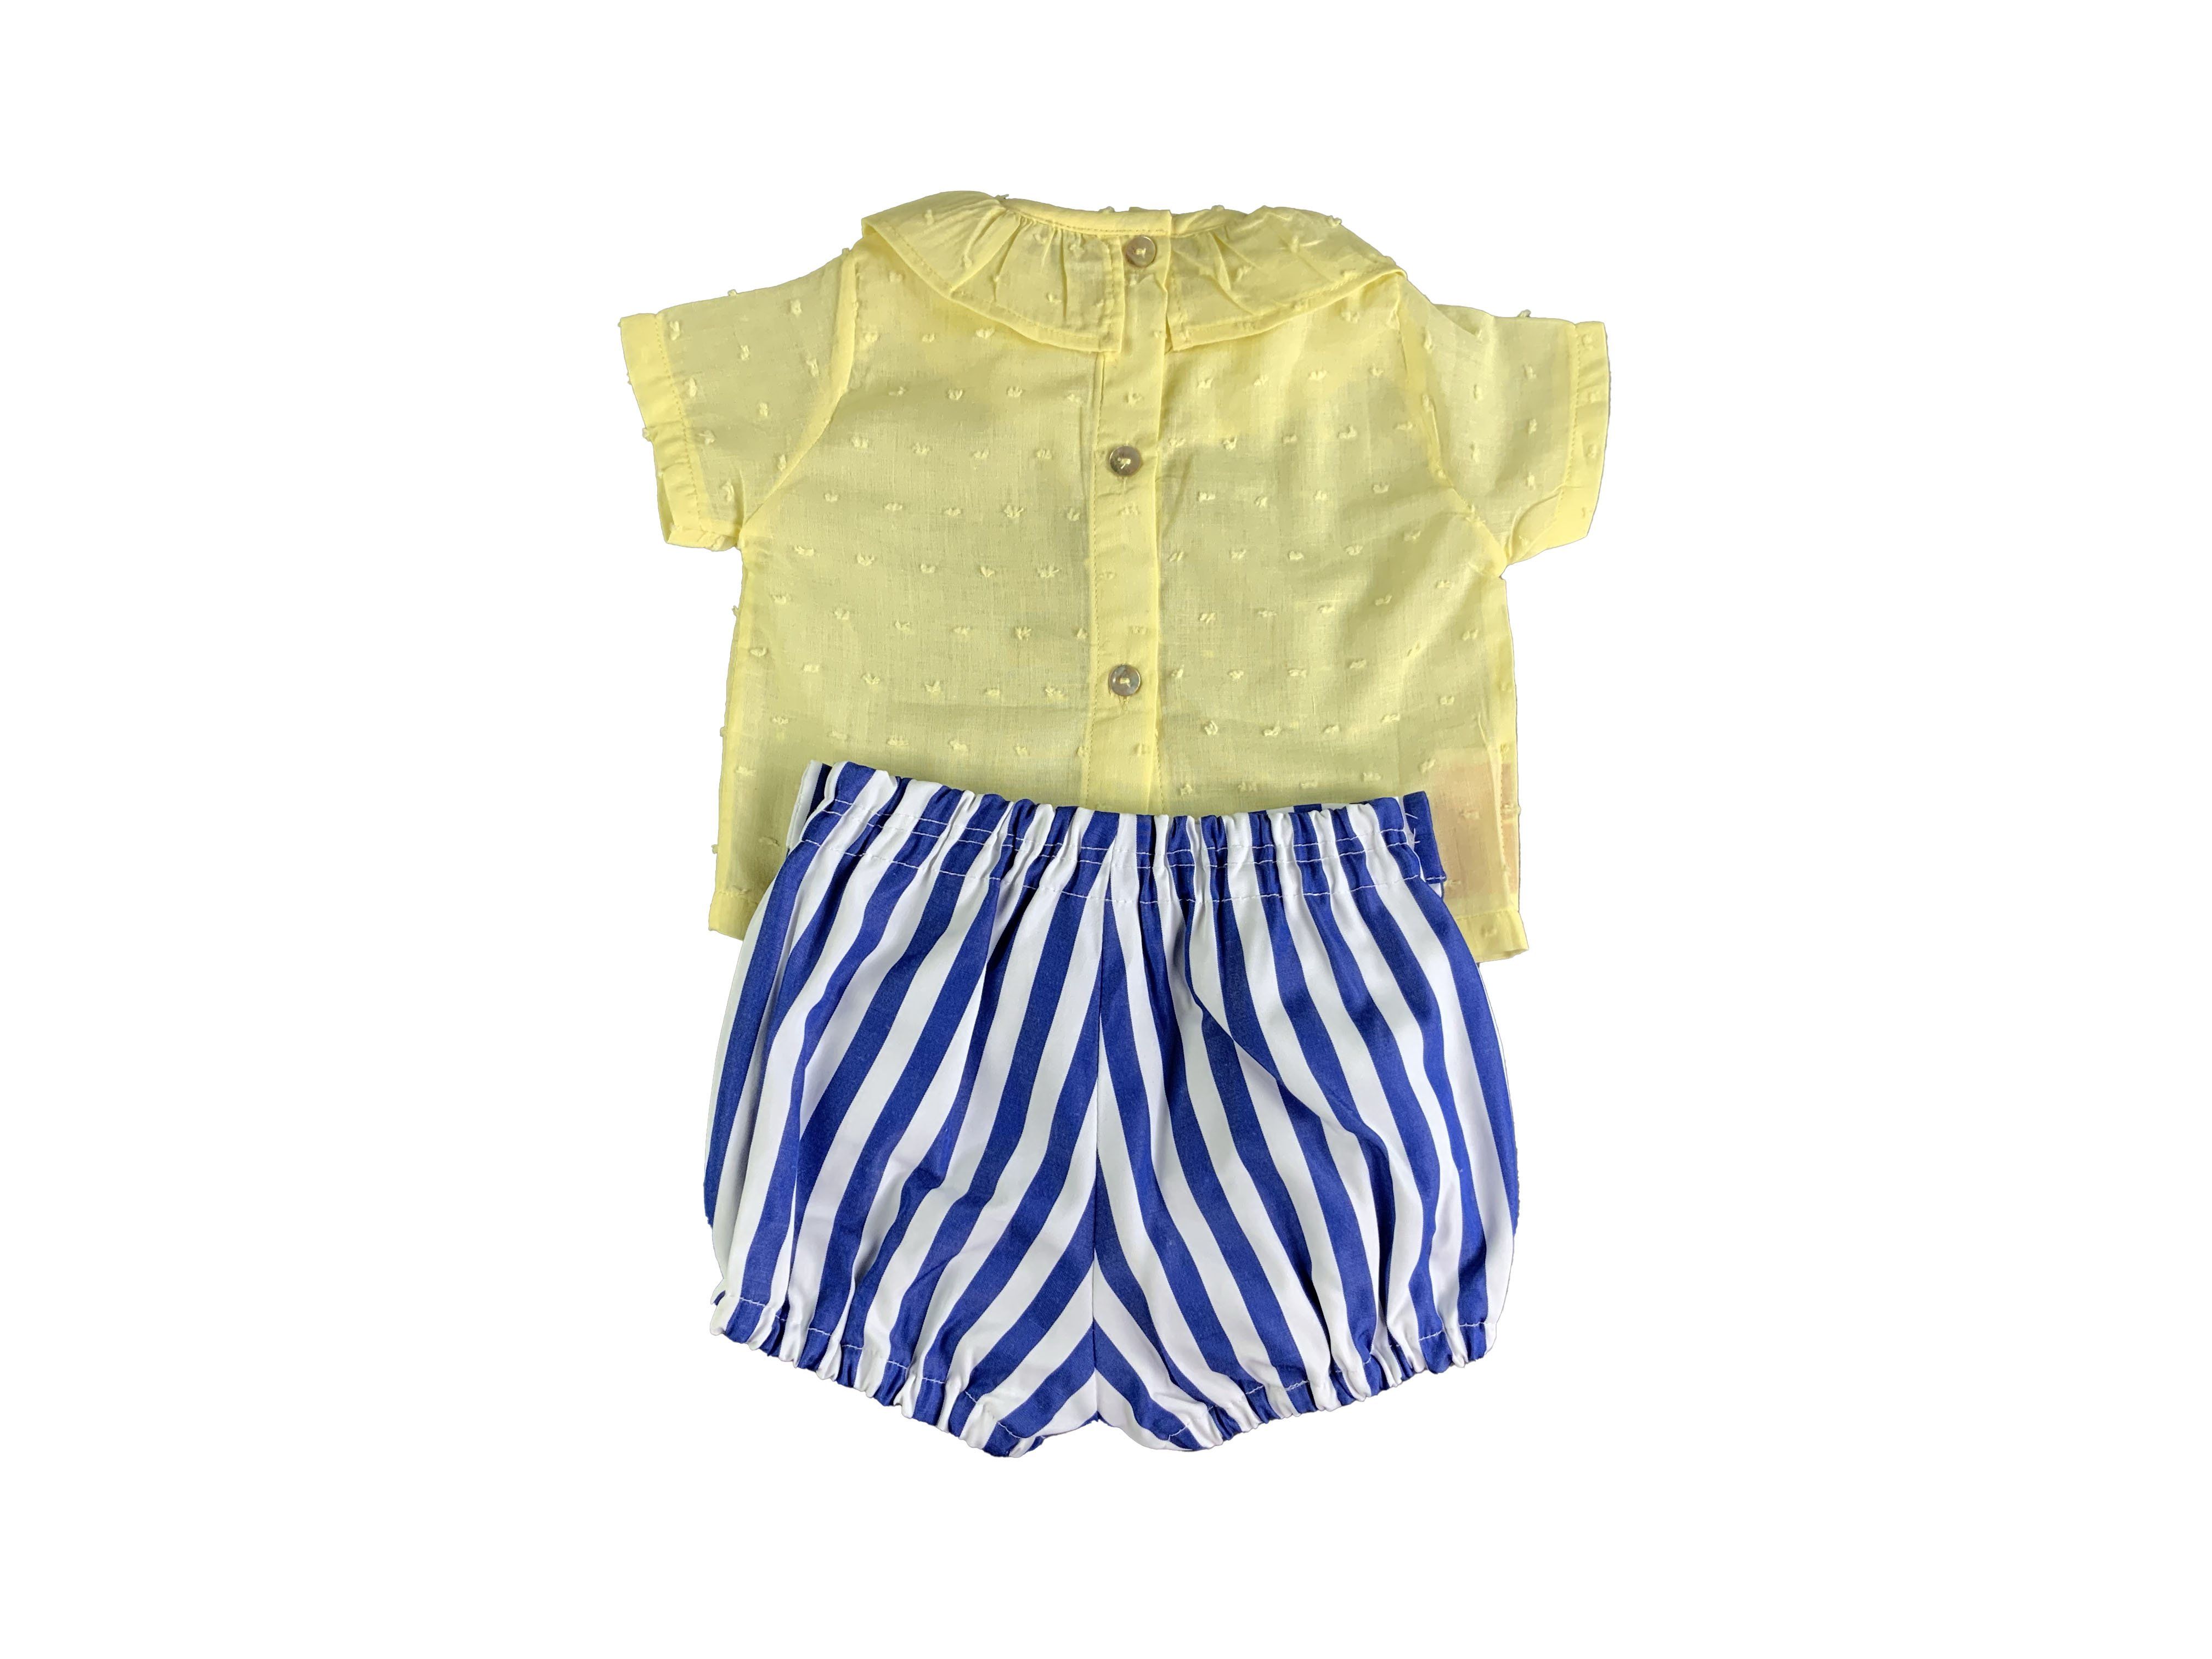 Yellow Round Ruffled Collar Top and Blue-White Stripe Shorts-Boy's Clothing-Boy's Clothing Store Shirt & Short Set Alfa Baby Boutique 